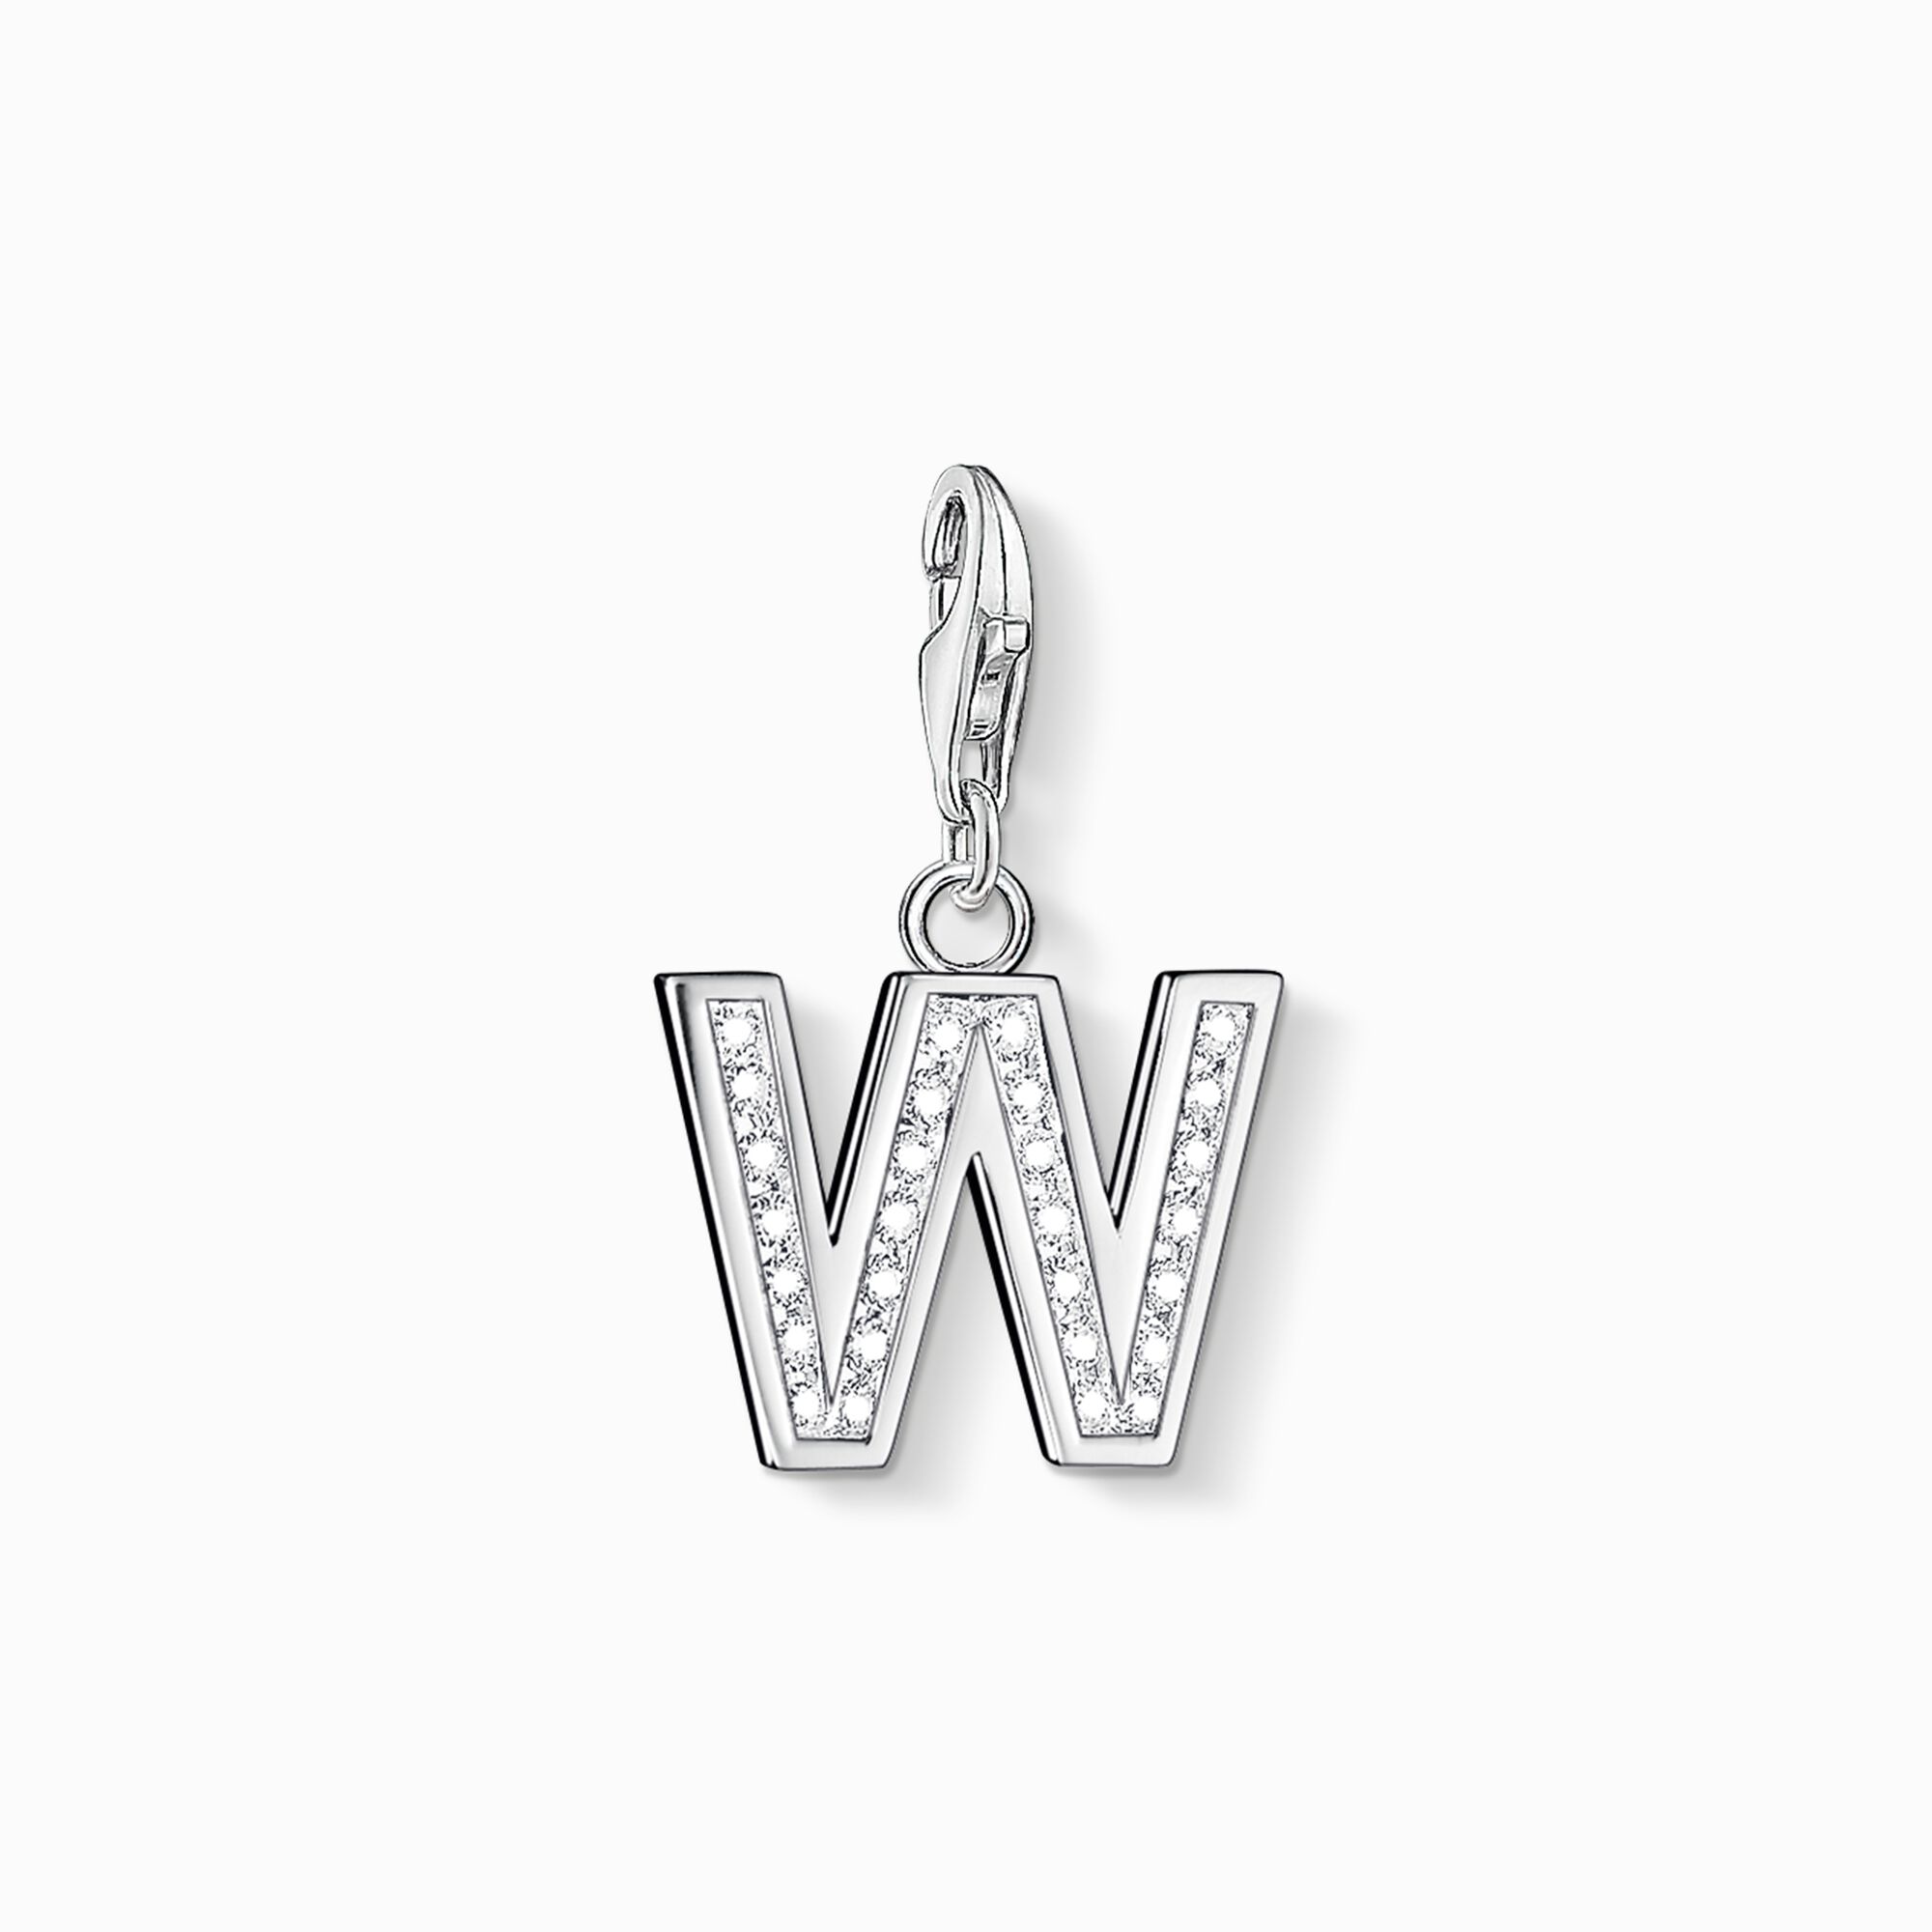 Charm pendant letter W from the Charm Club collection in the THOMAS SABO online store